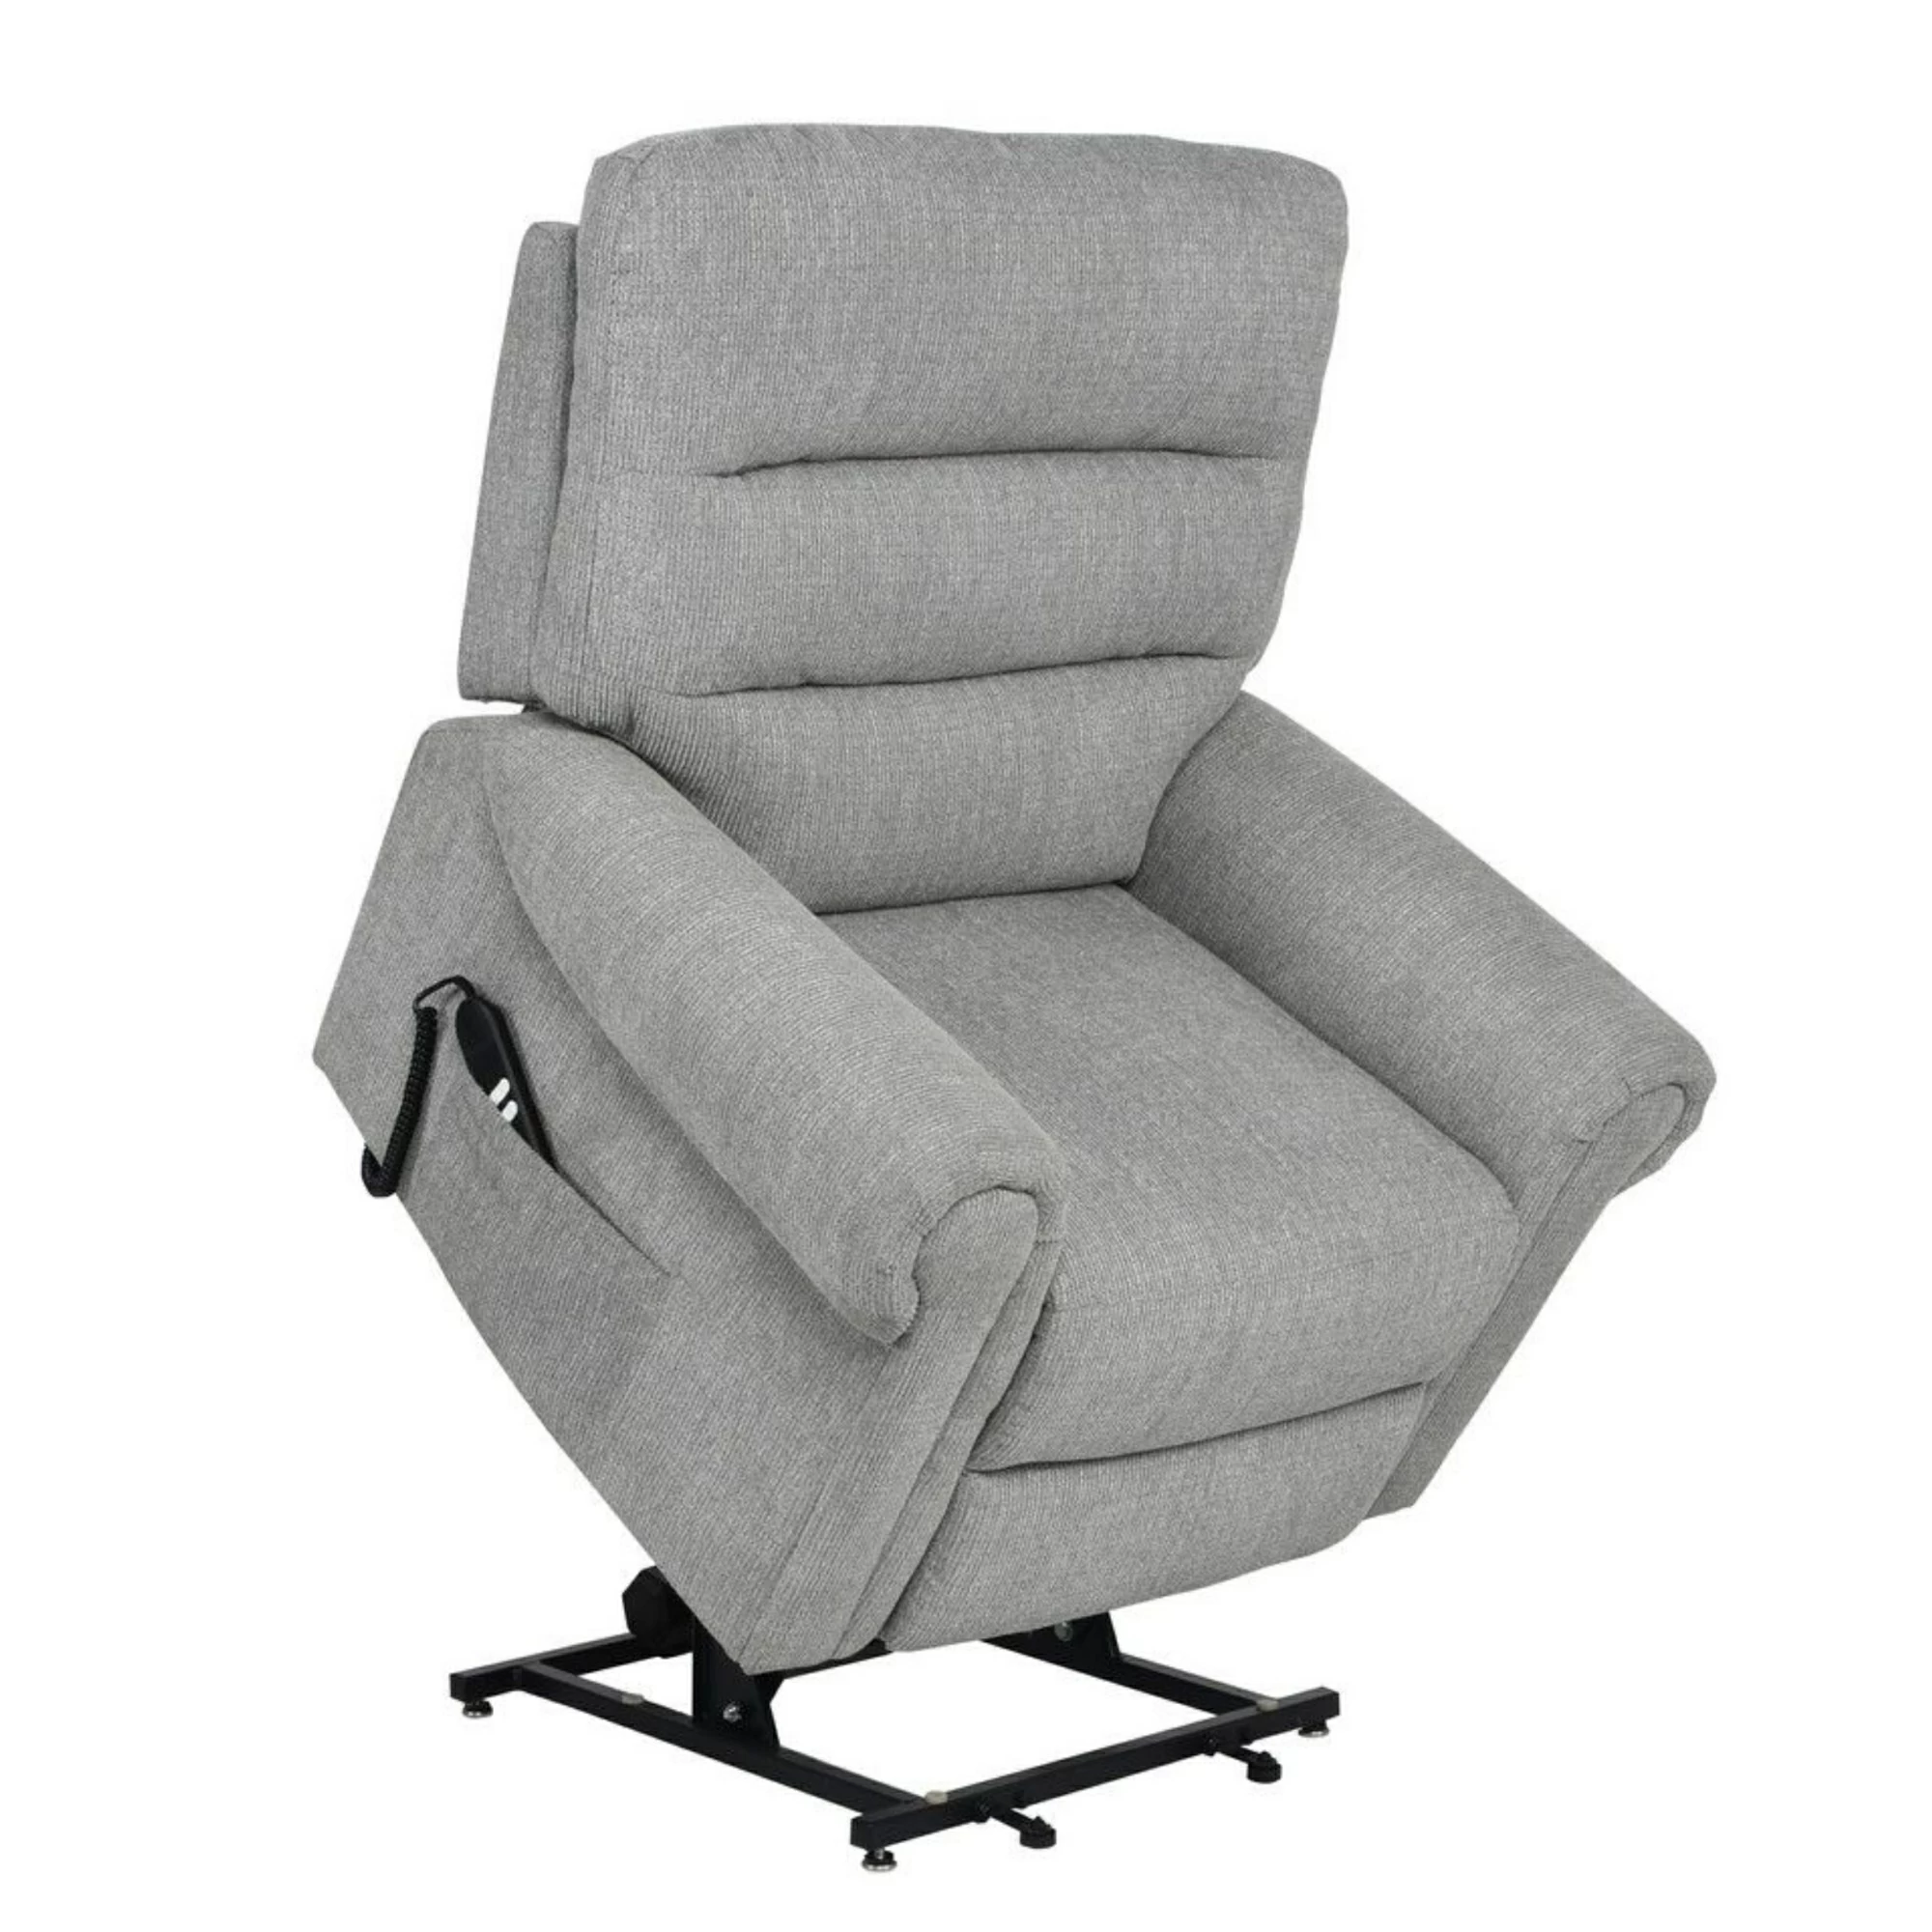 GFA - Grantham - Frost Grey - Fabric - Dual Motor - Lift and Riser Recliner  Chair